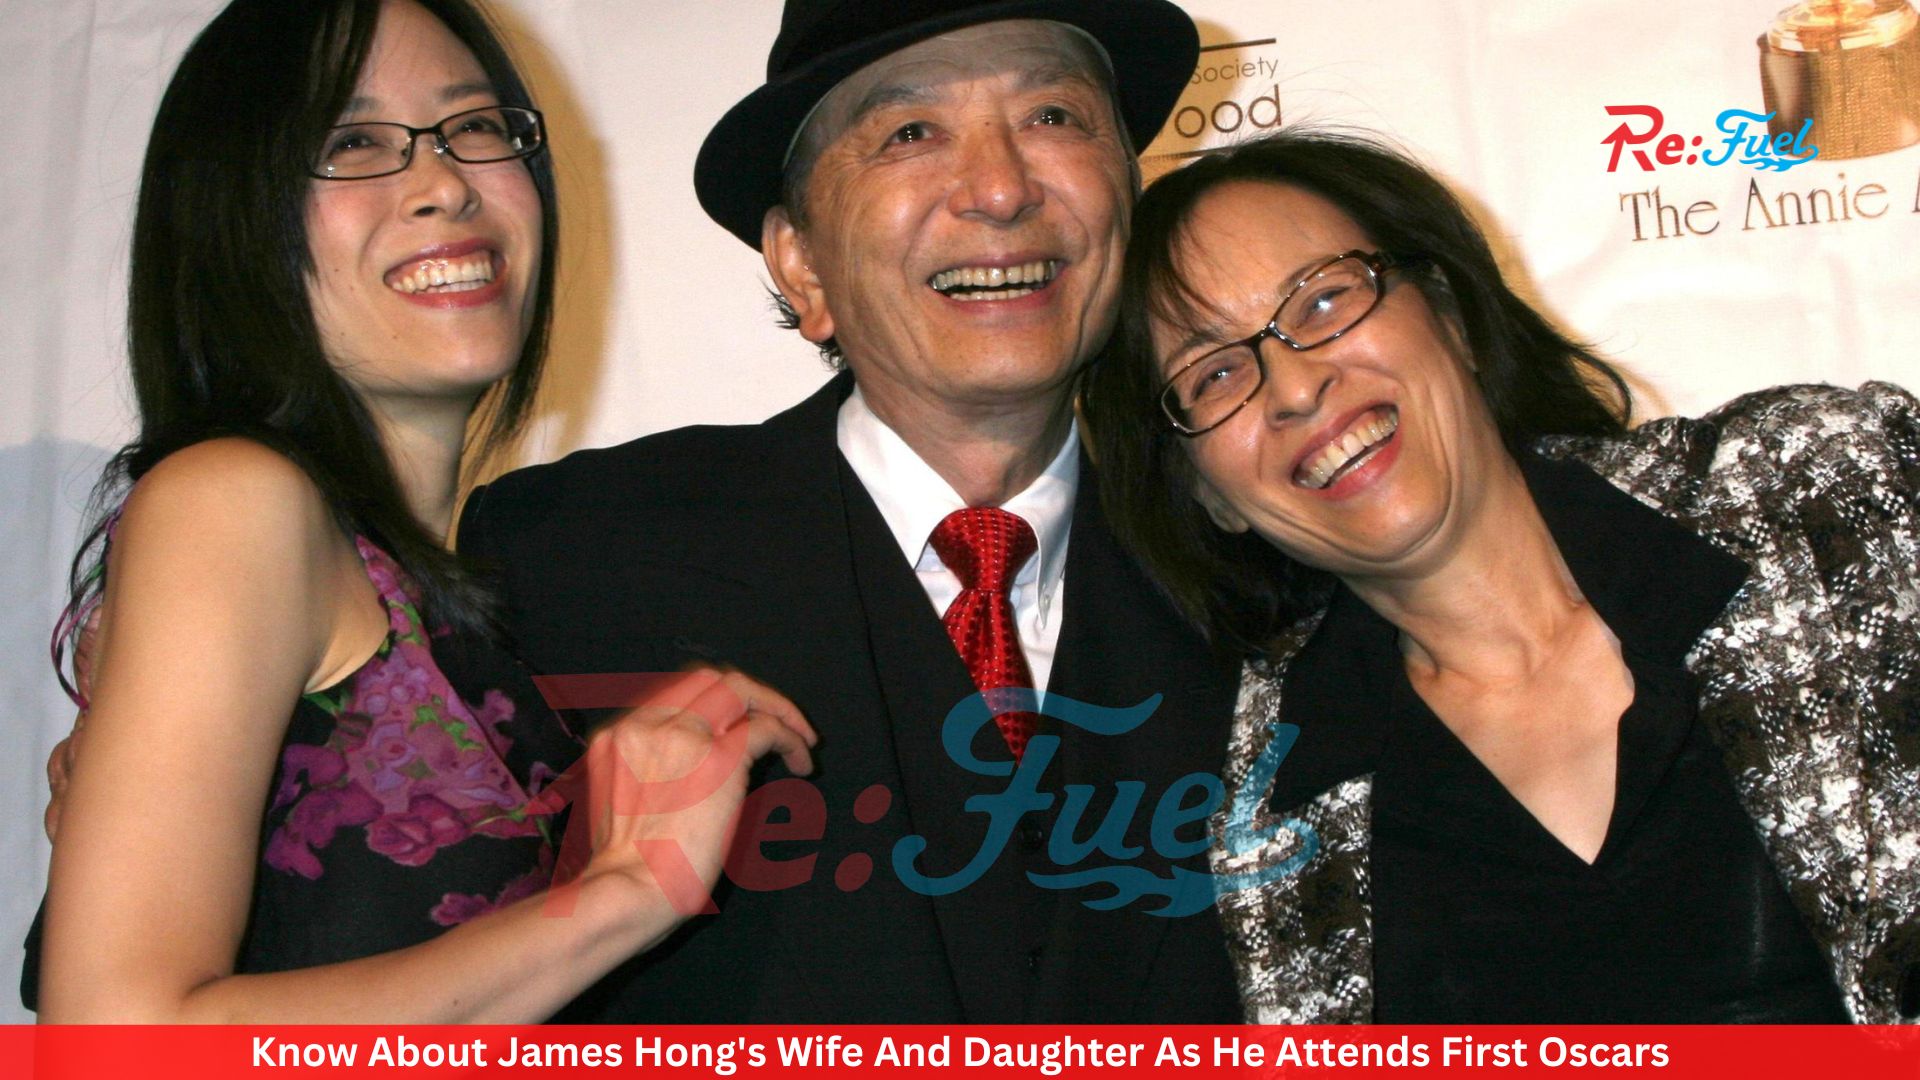 Know About James Hong's Wife And Daughter As He Attends First Oscars